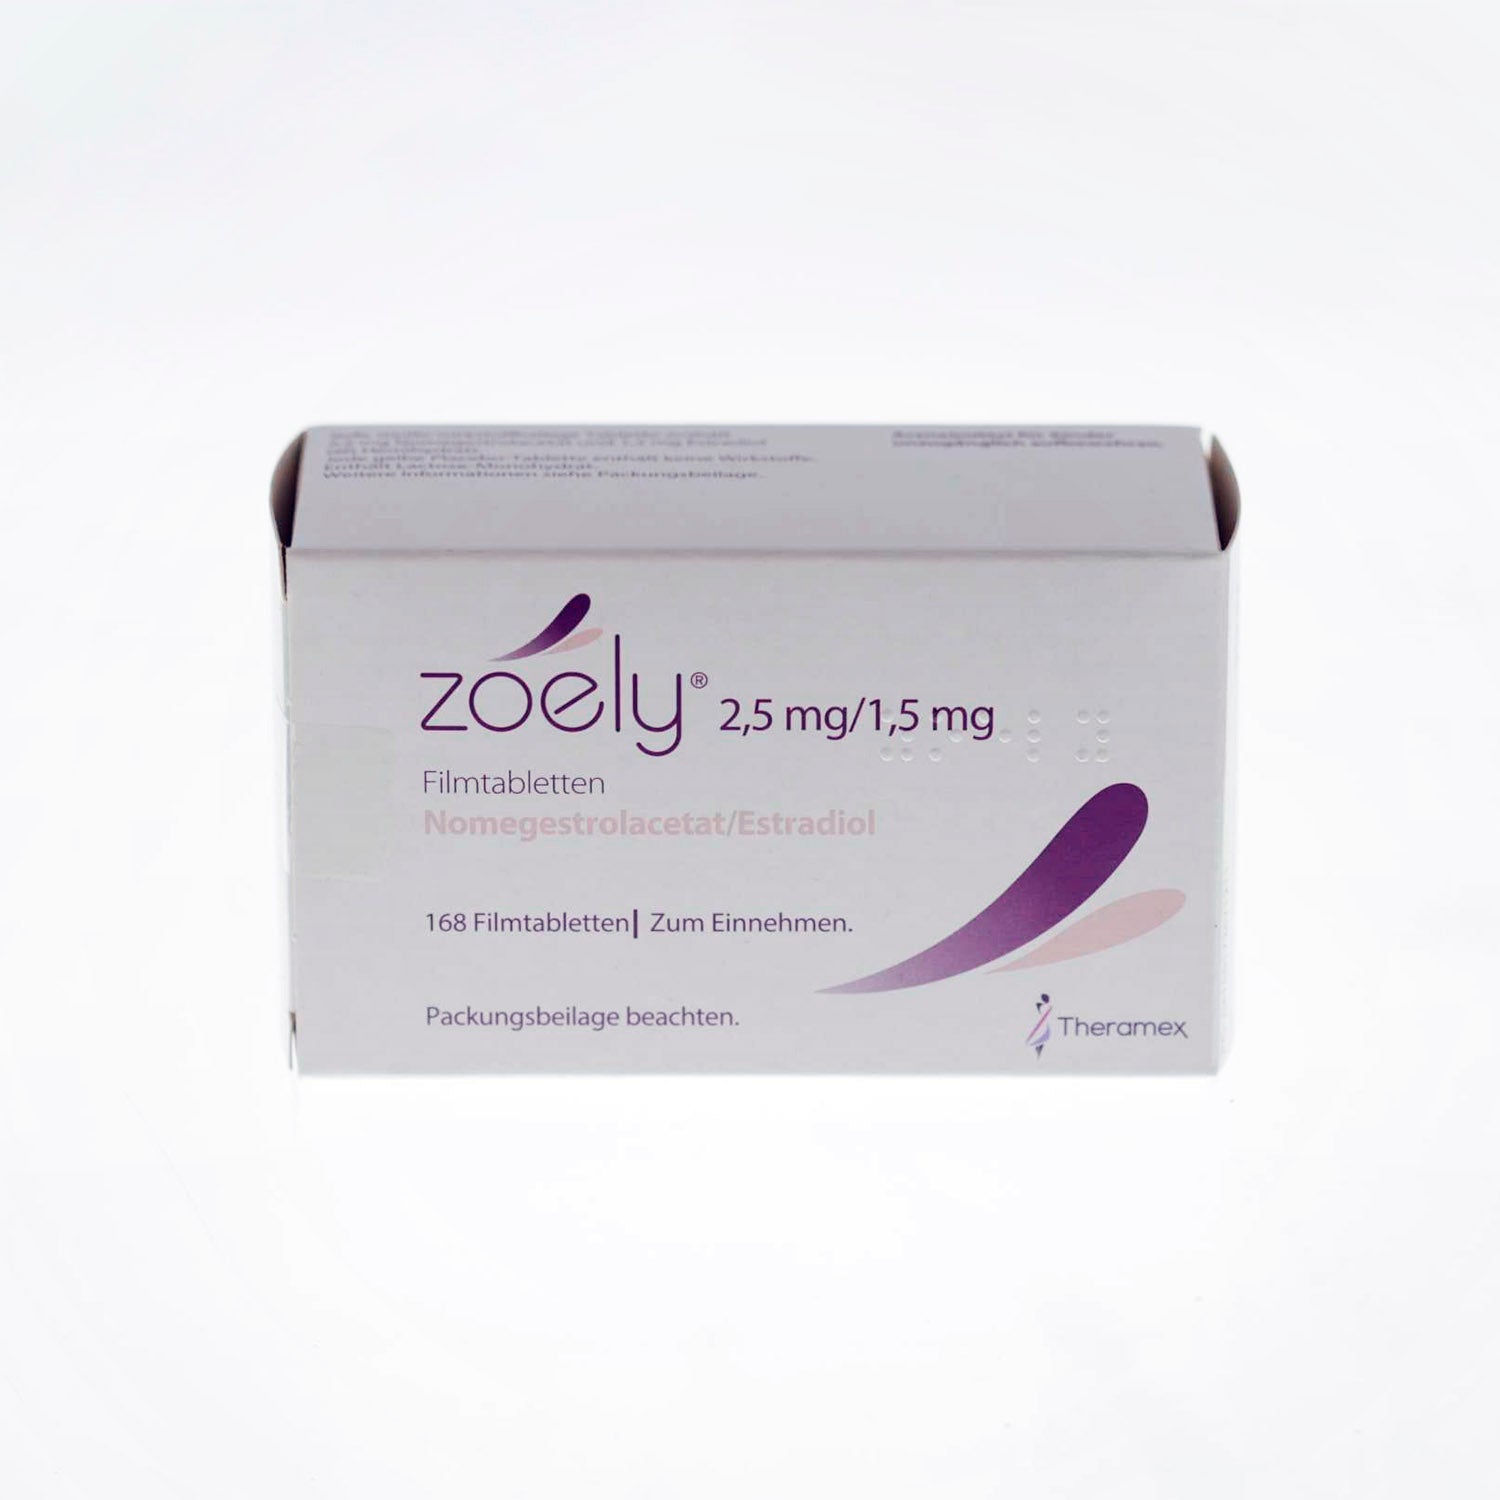 Zoely 2.5/1.5mg